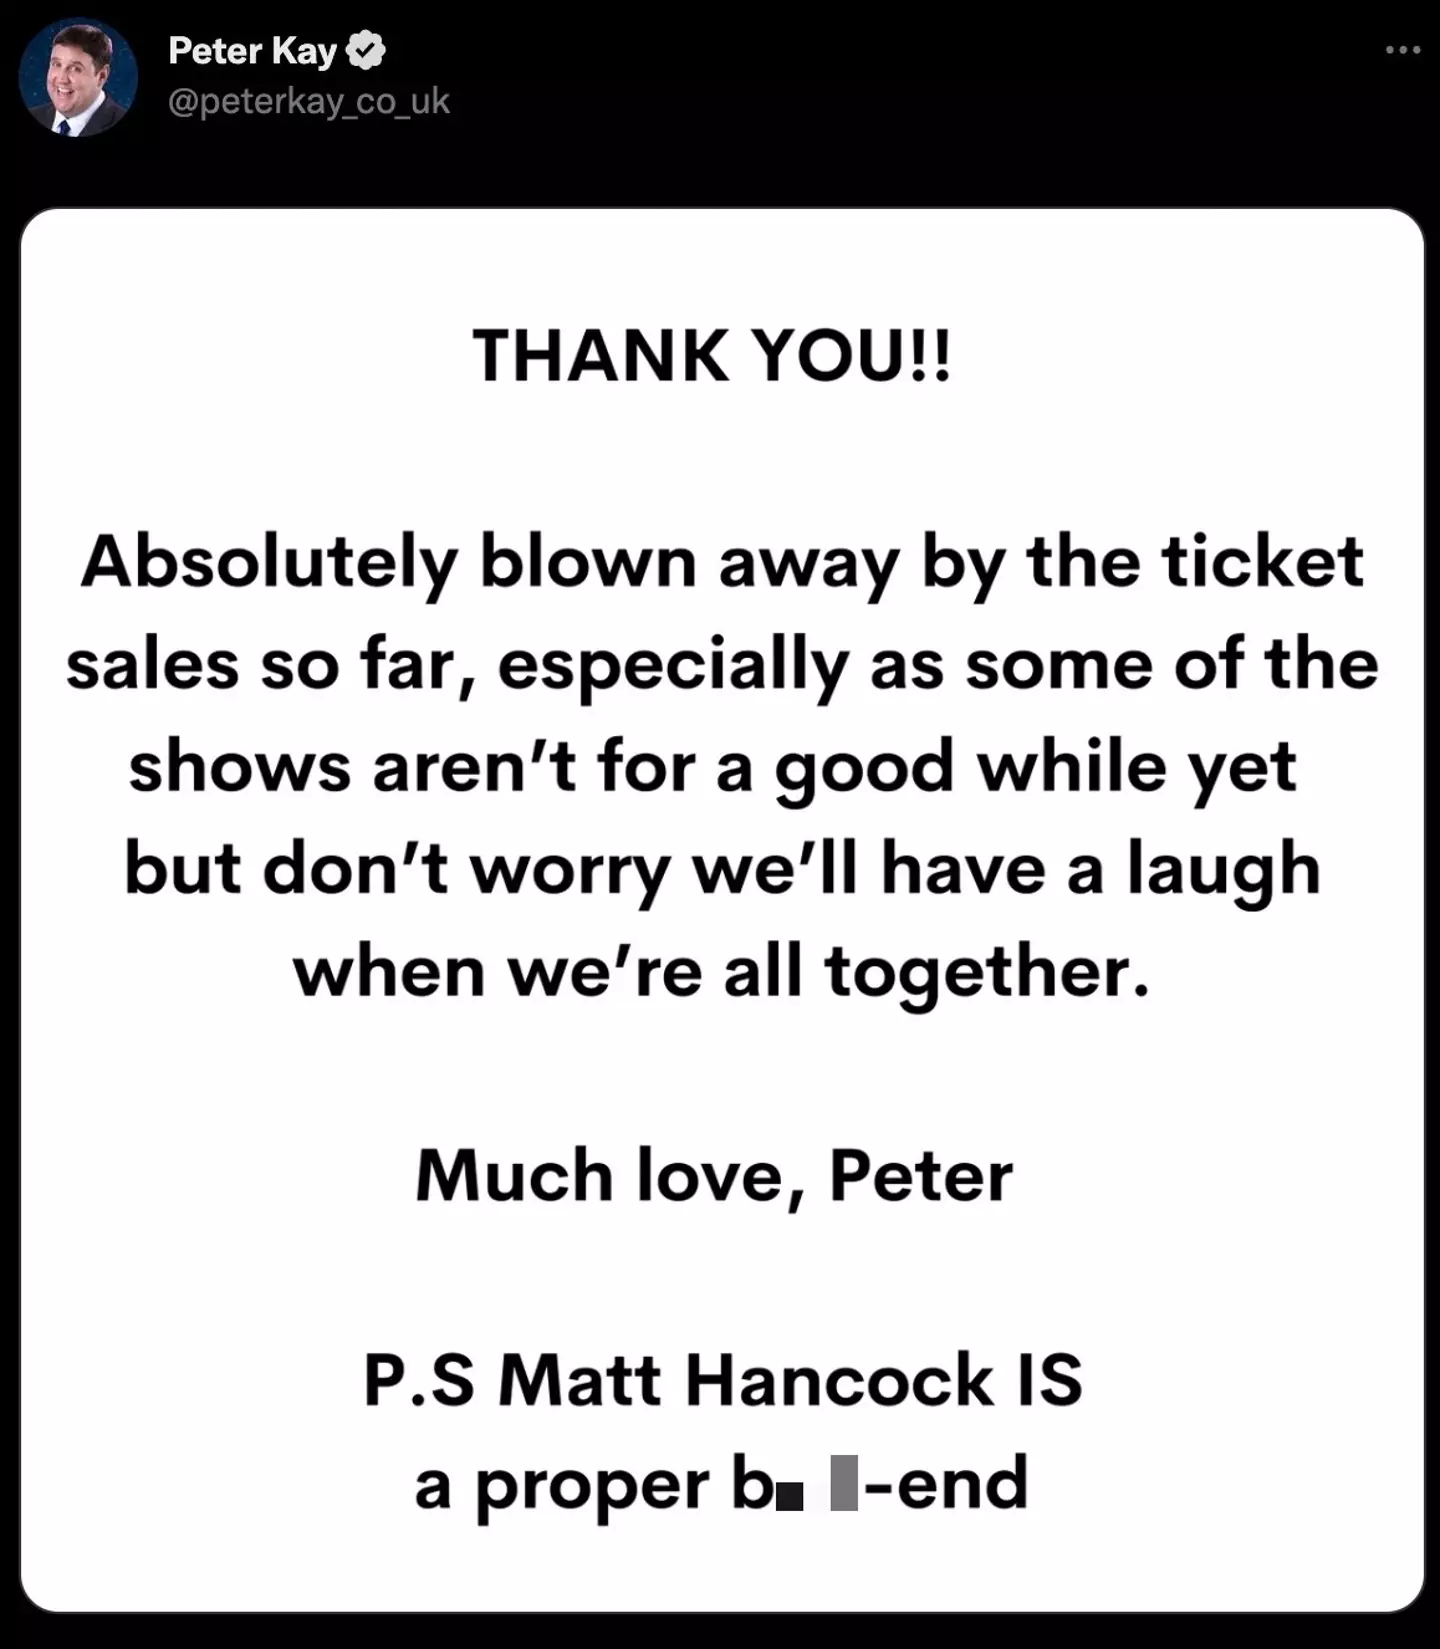 Peter Kay thanked his fans for buying tickets to his new tour.